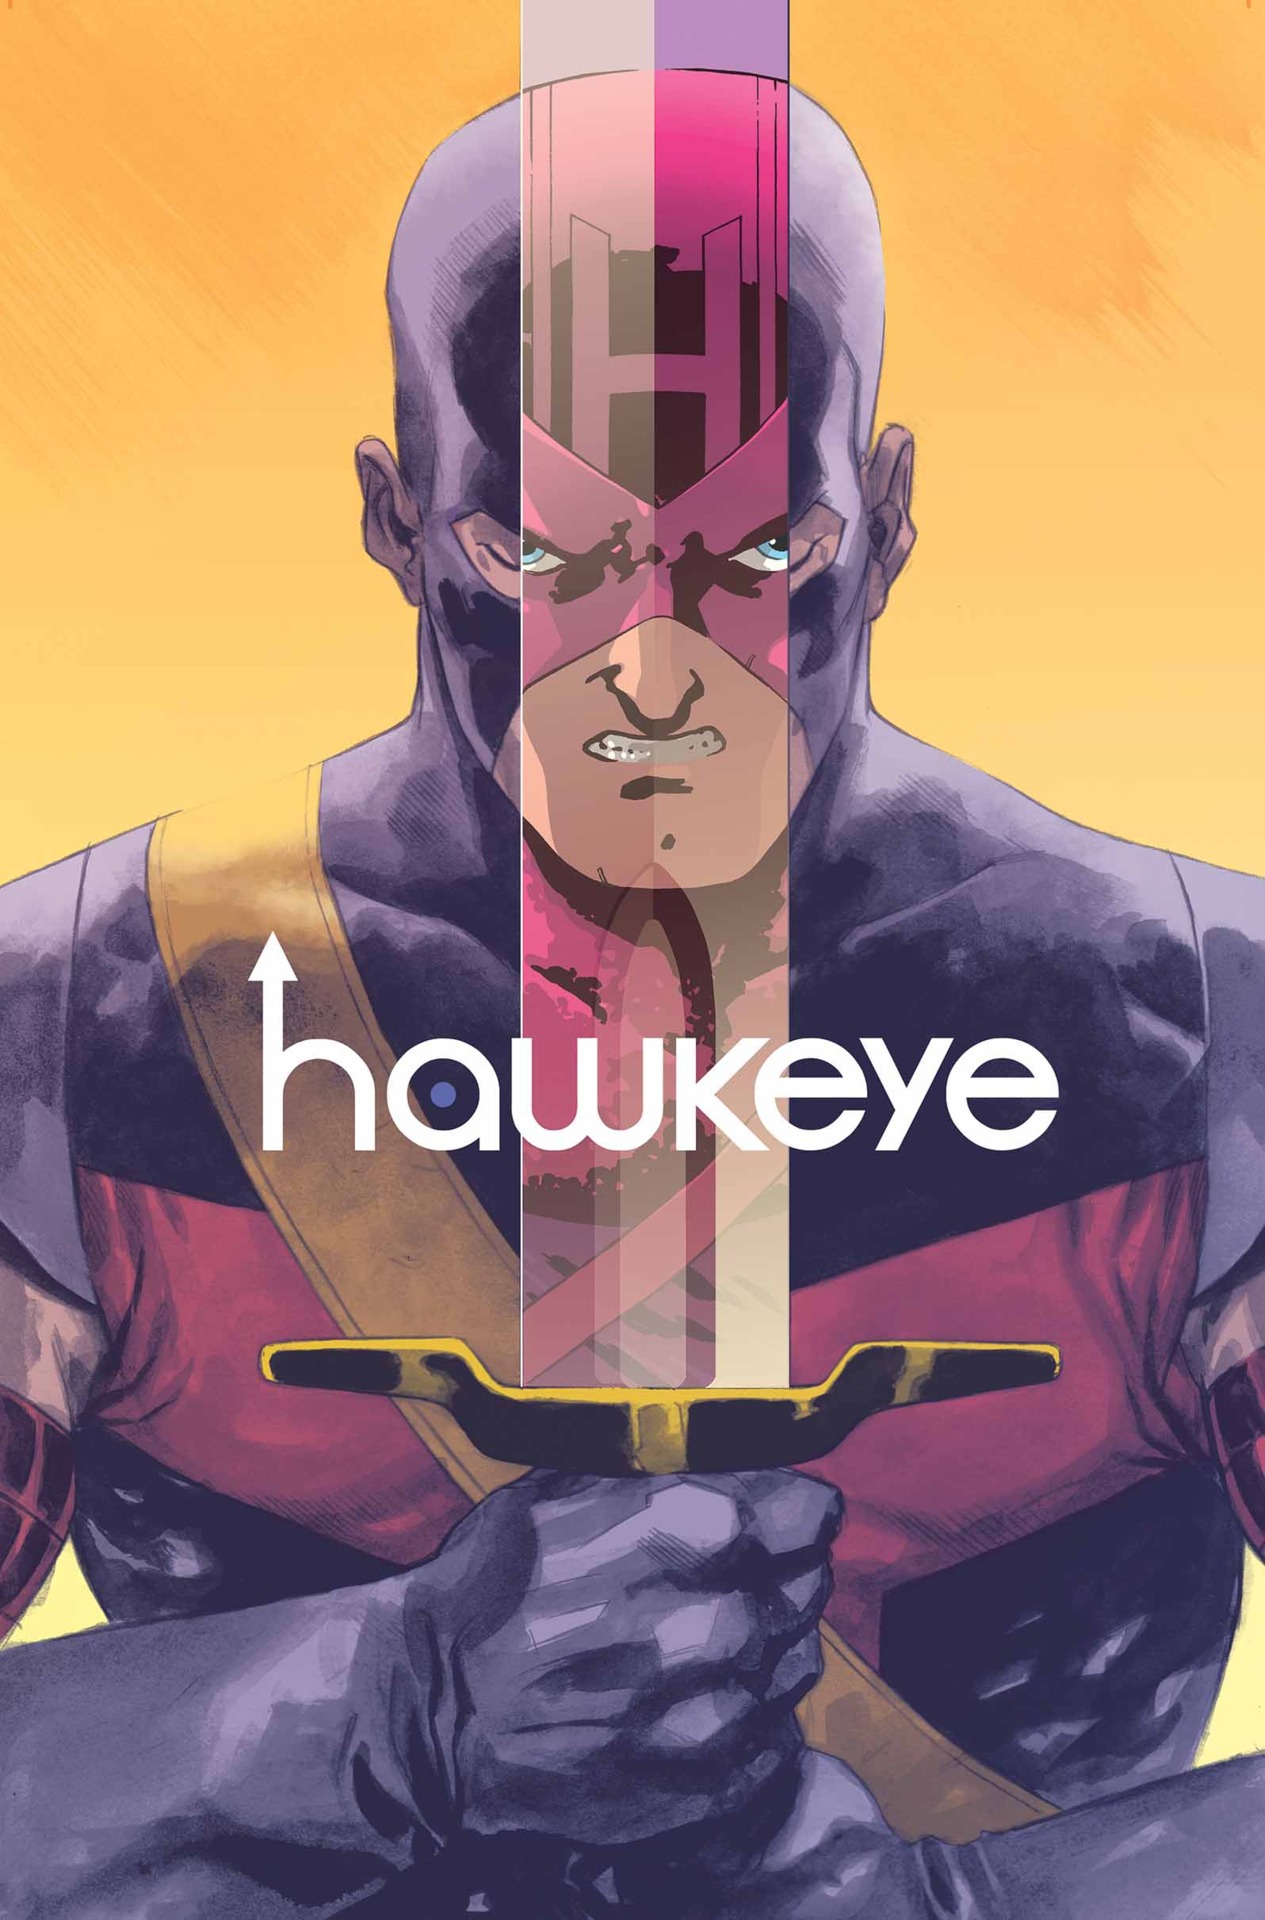 Could we see the return of Hawkeye's costume? if so take all my f*cking money